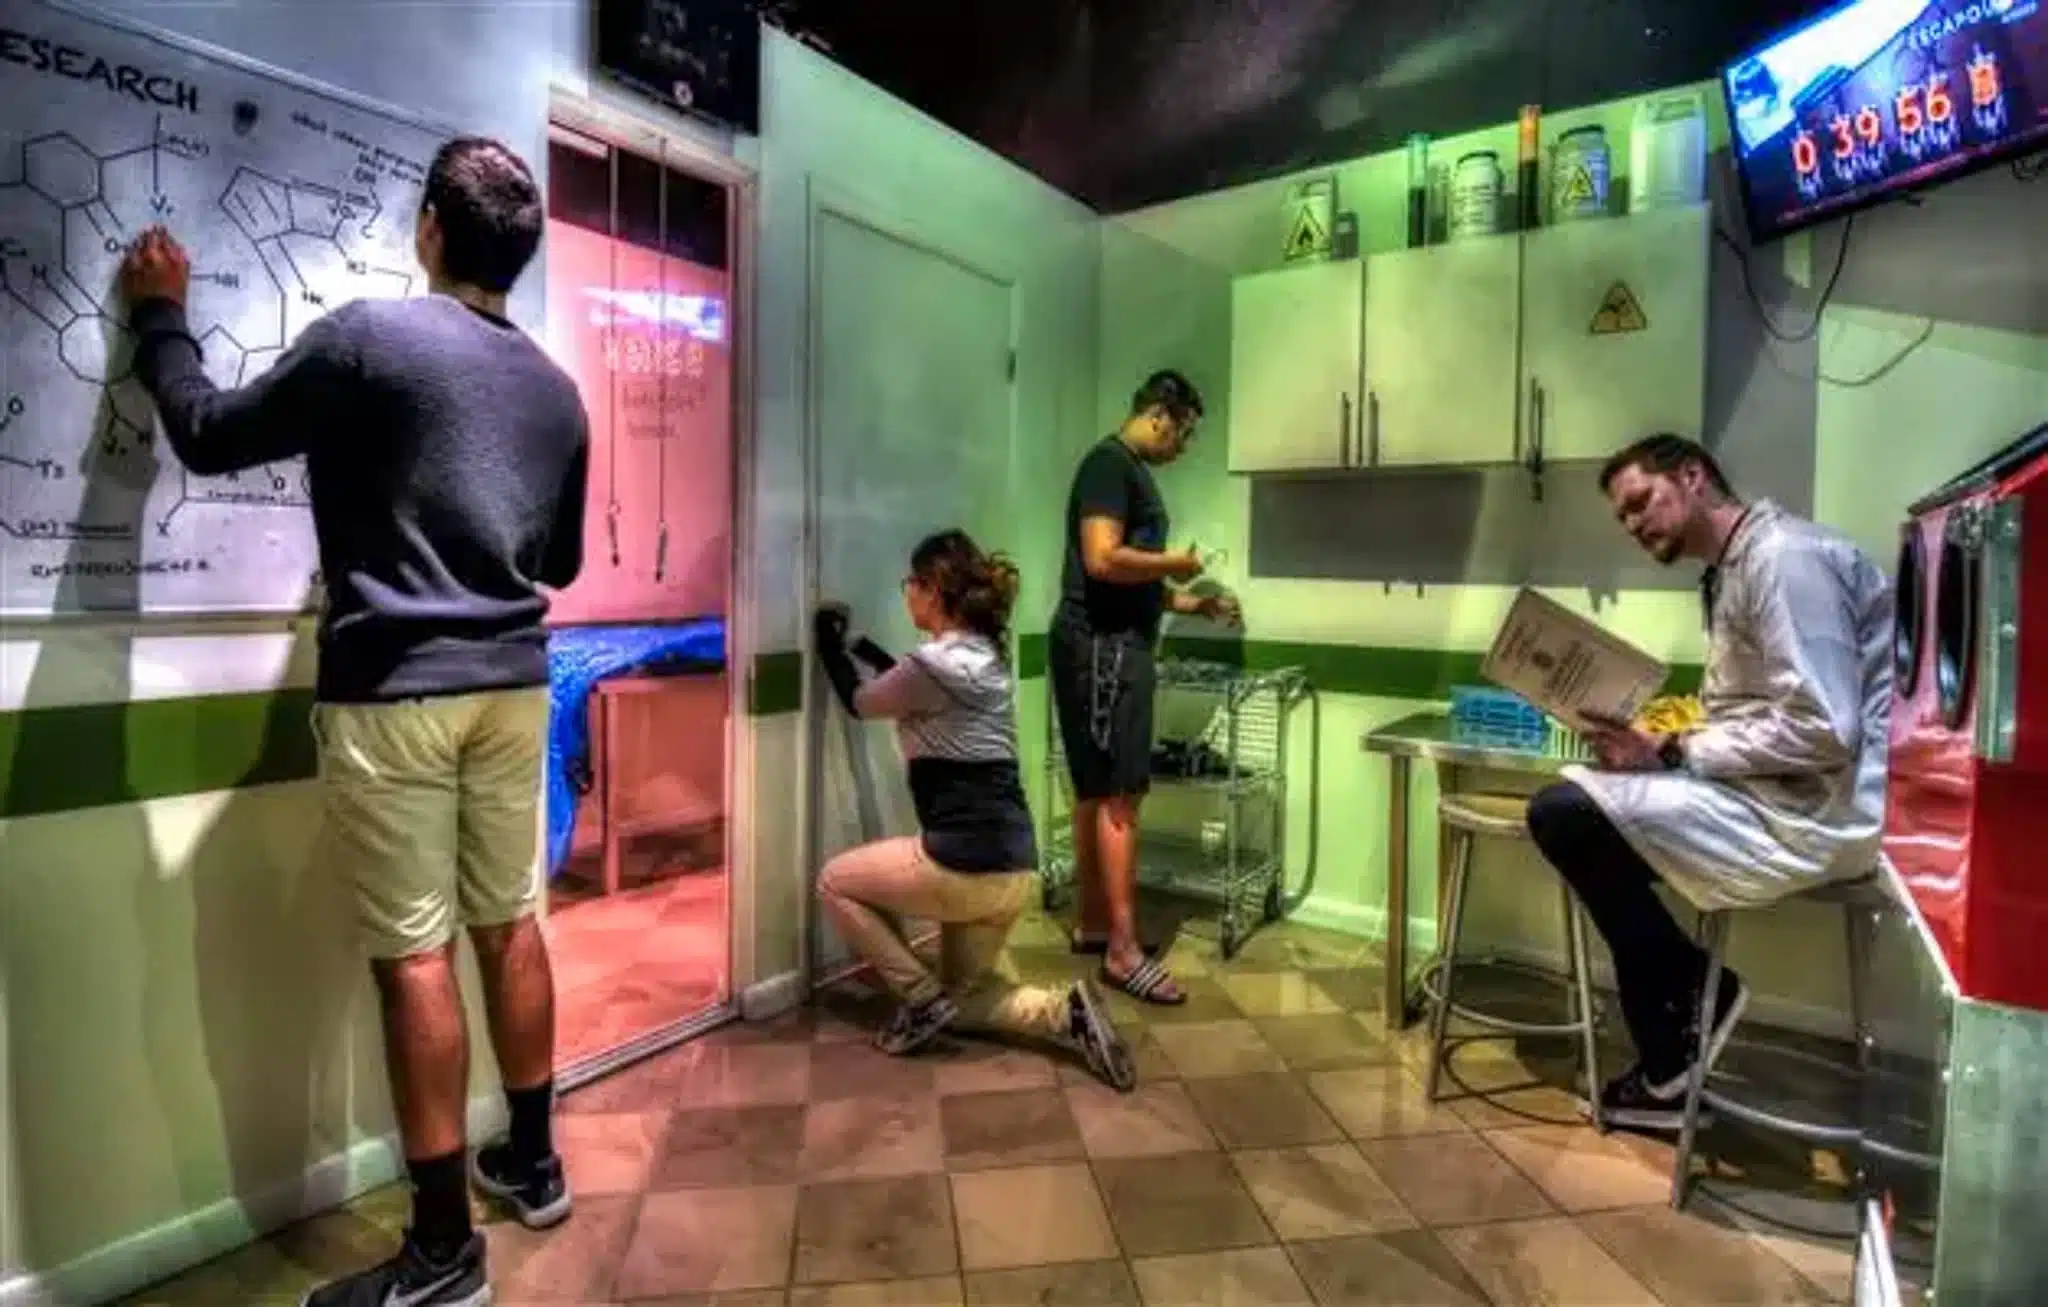 A group searching for clues in an escape room game